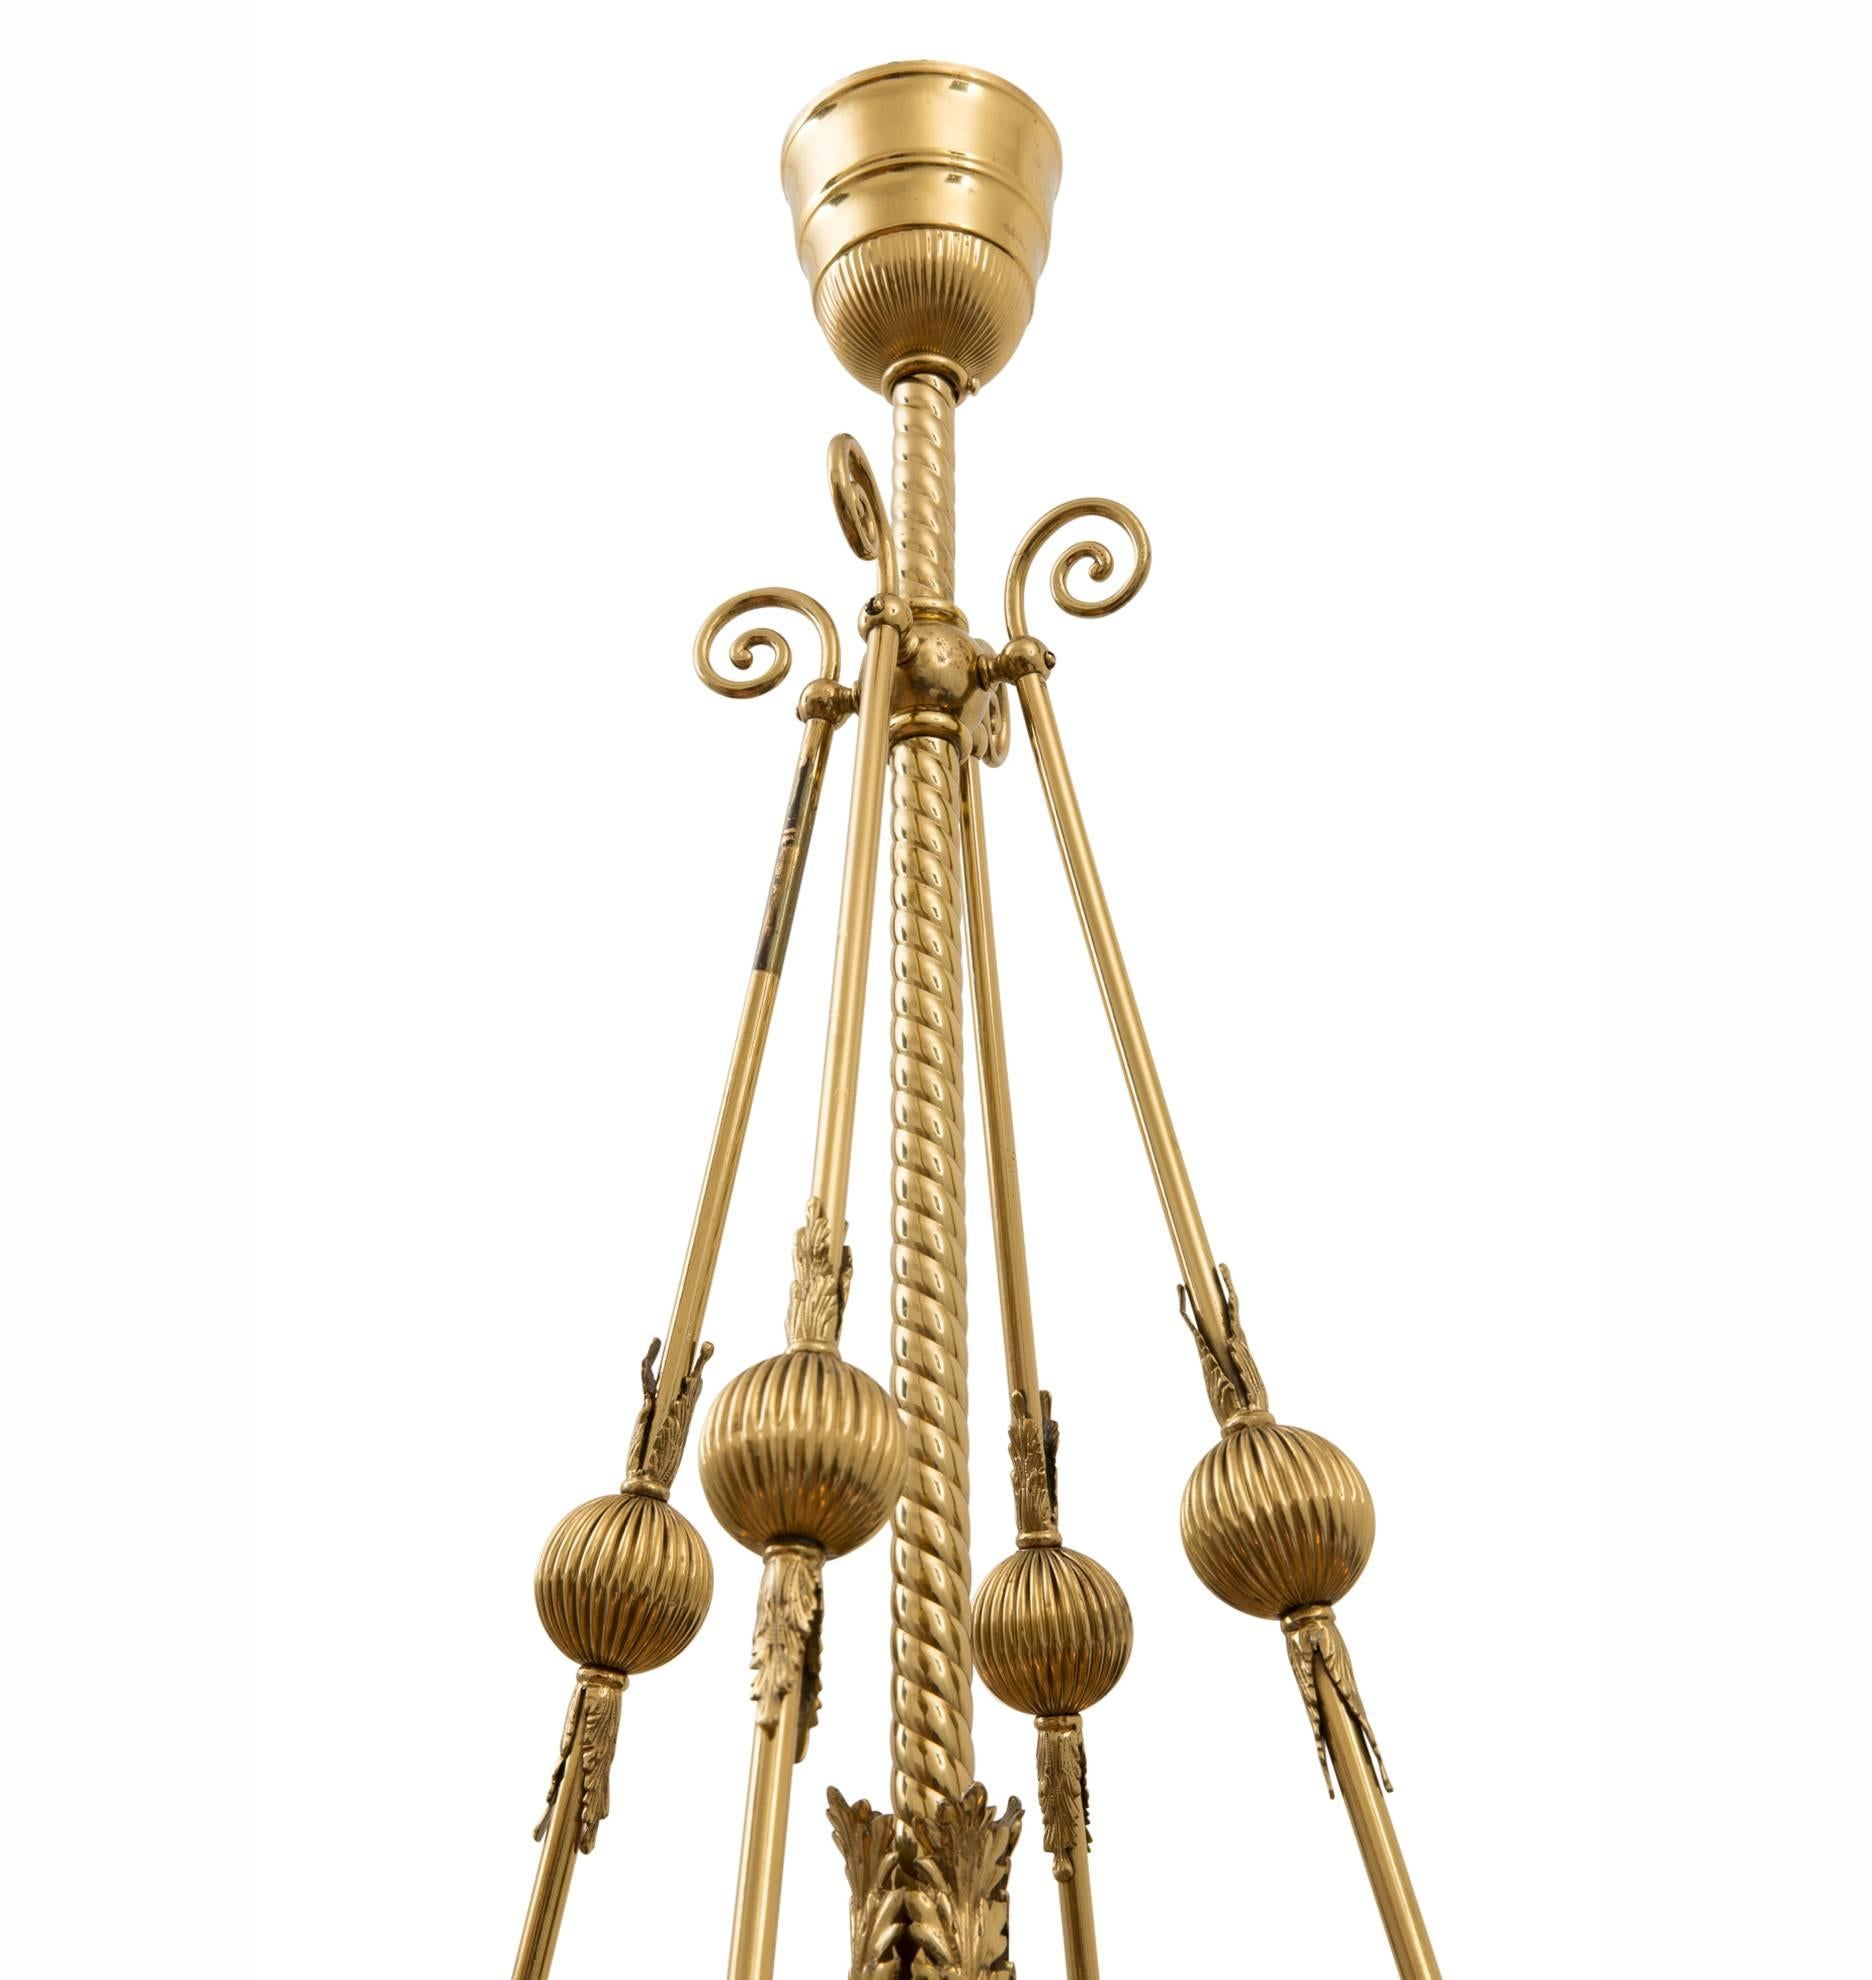 Early 20th Century Gas/Electric Empire Chandelier with Brass-Plated Finish, circa 1900